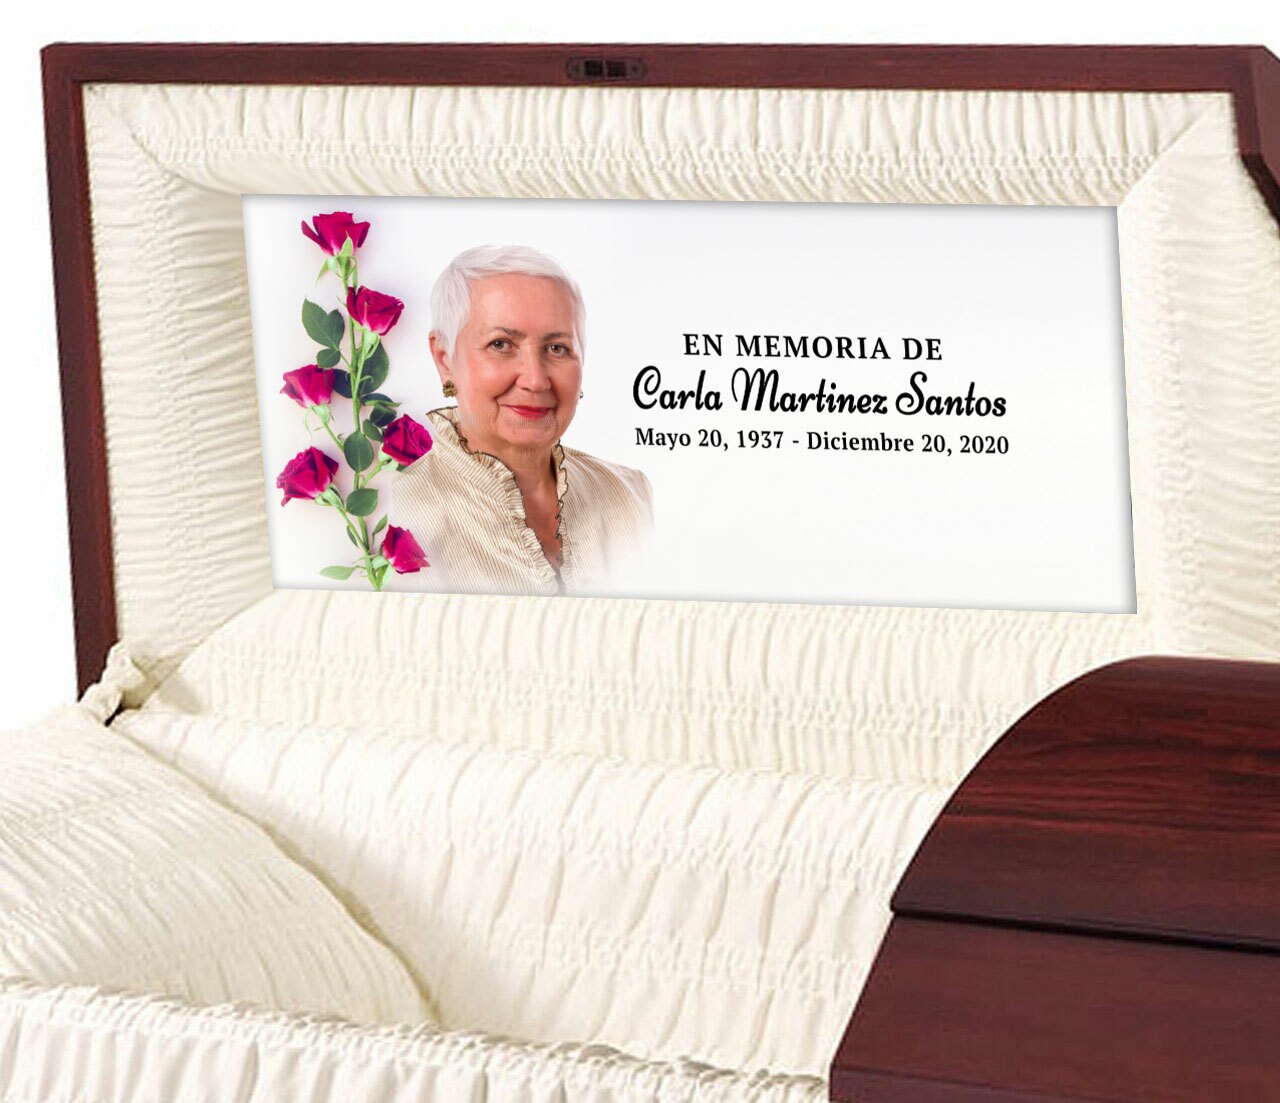 77+] Funeral Background Pictures